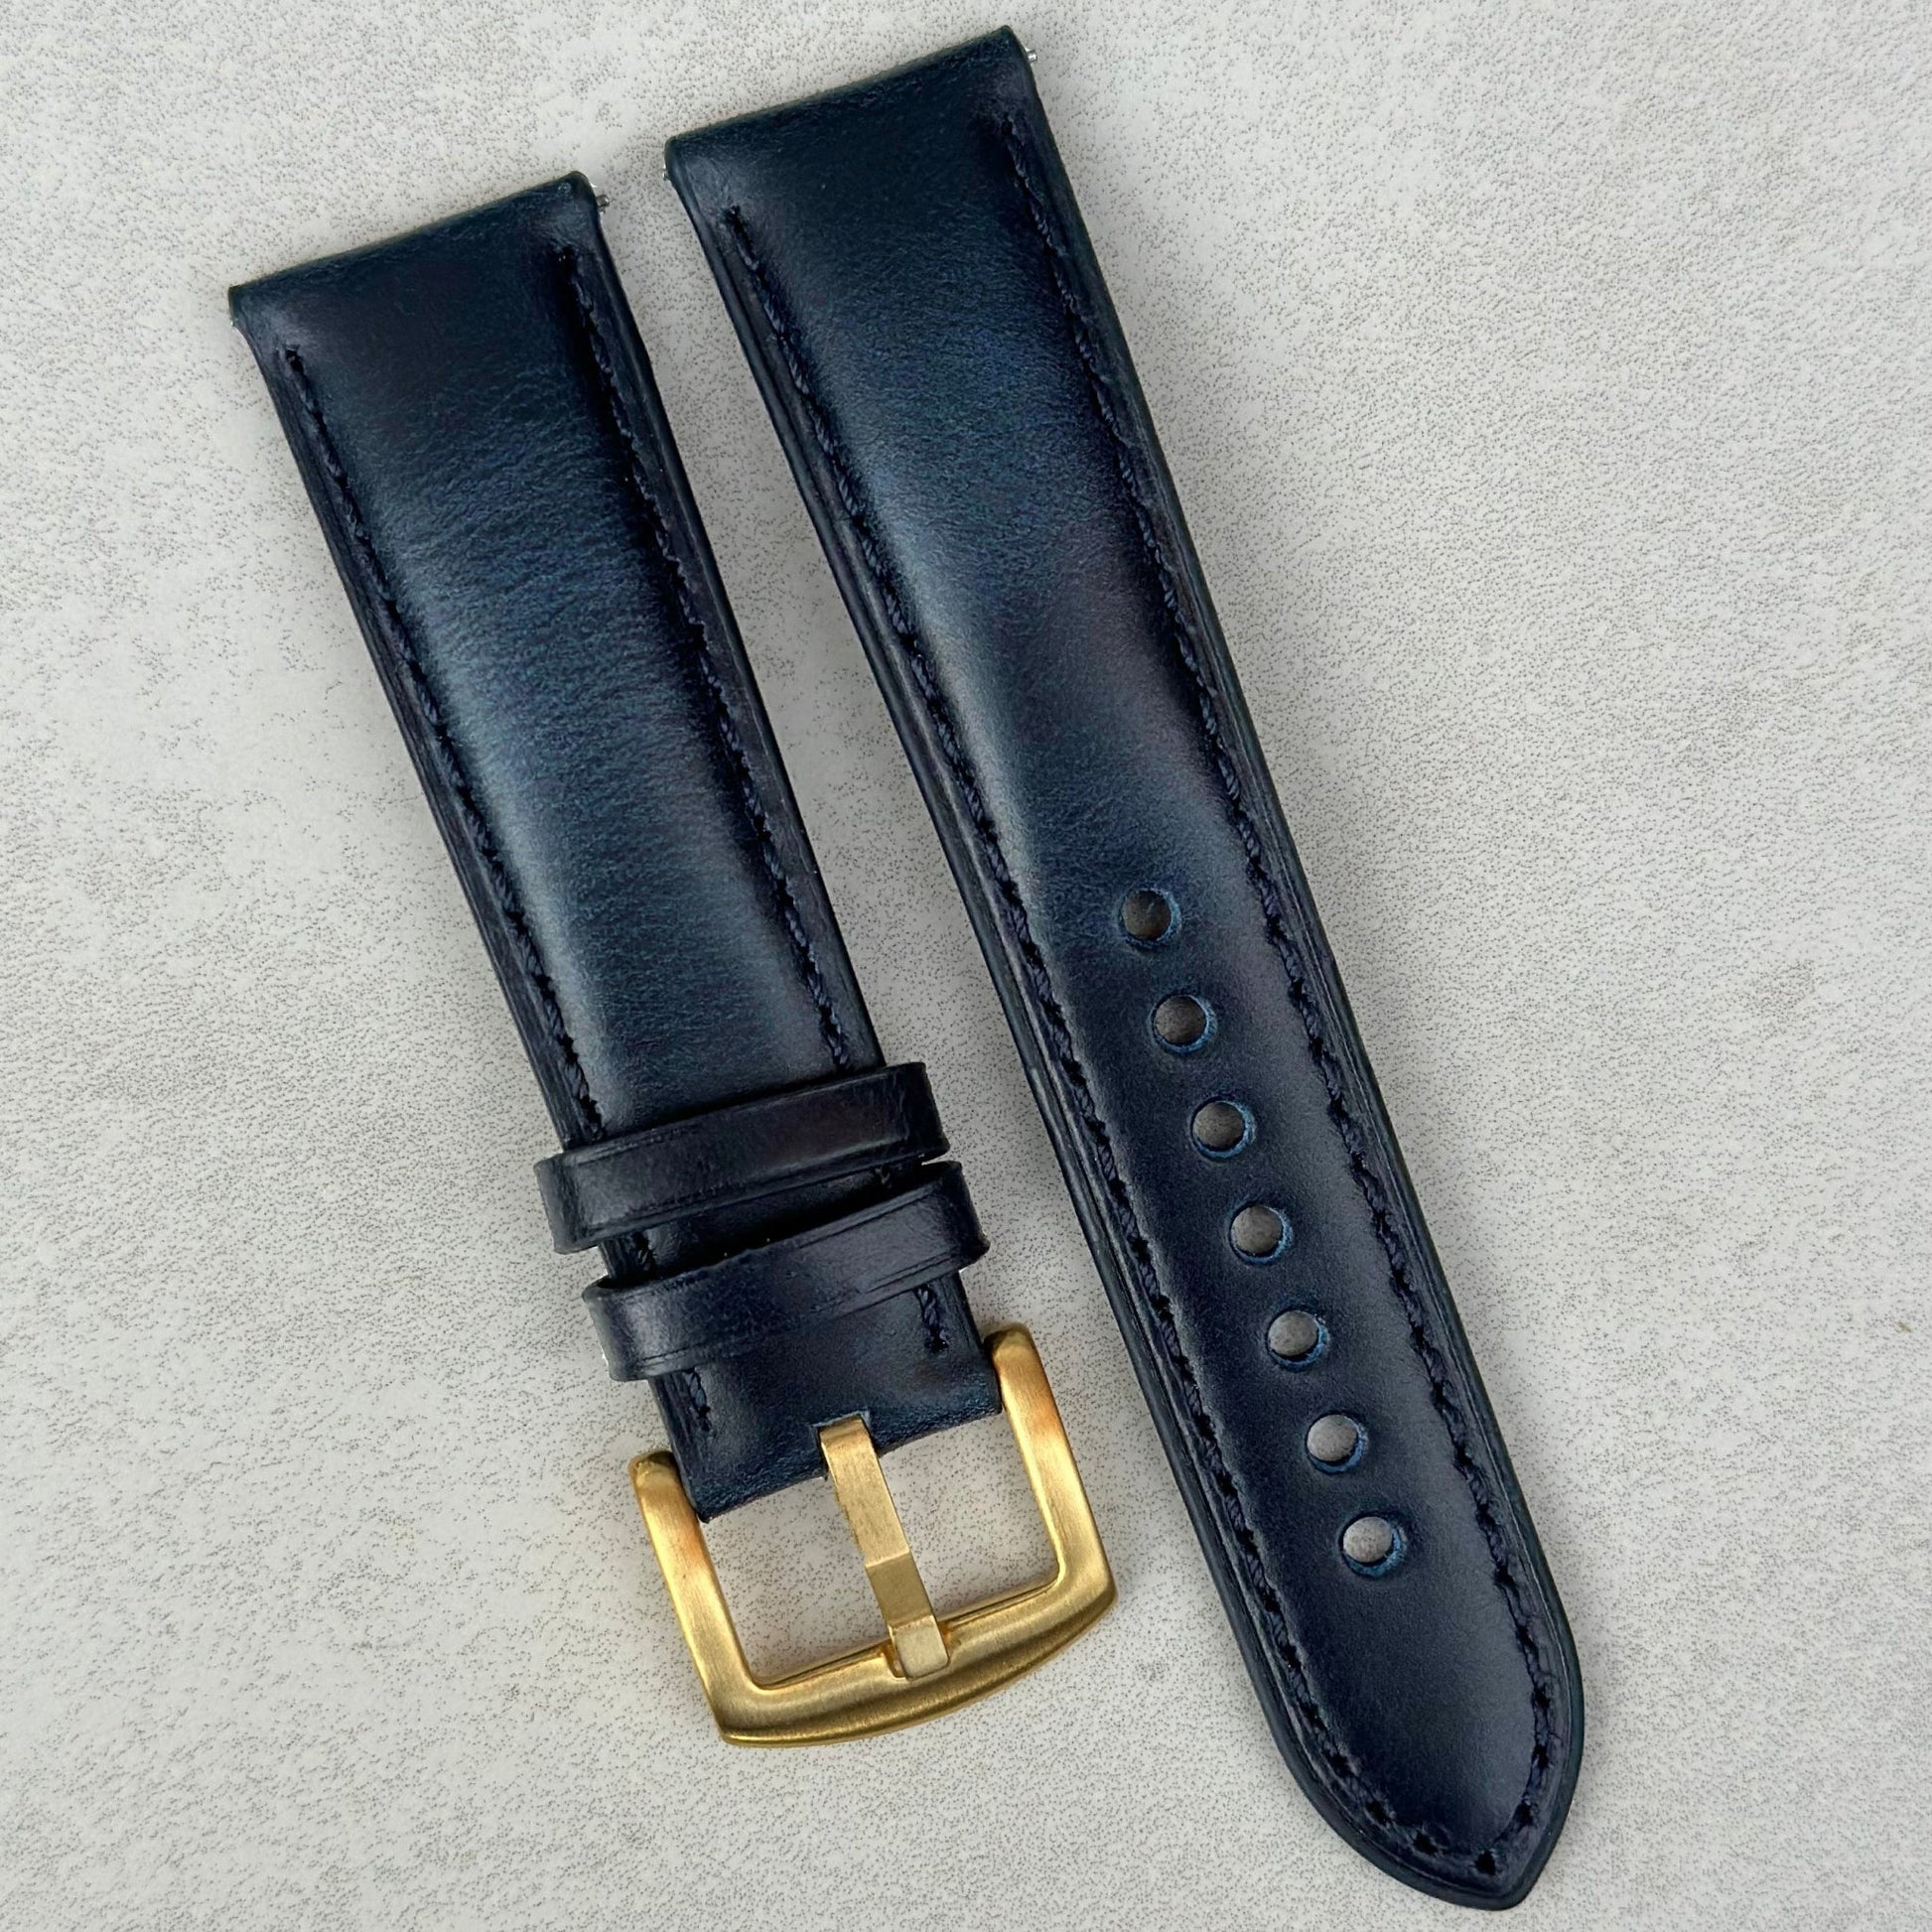 Athens deep ocean blue full grain leather watch strap. Fitted with a PVD gold 316L stainless steel buckle.